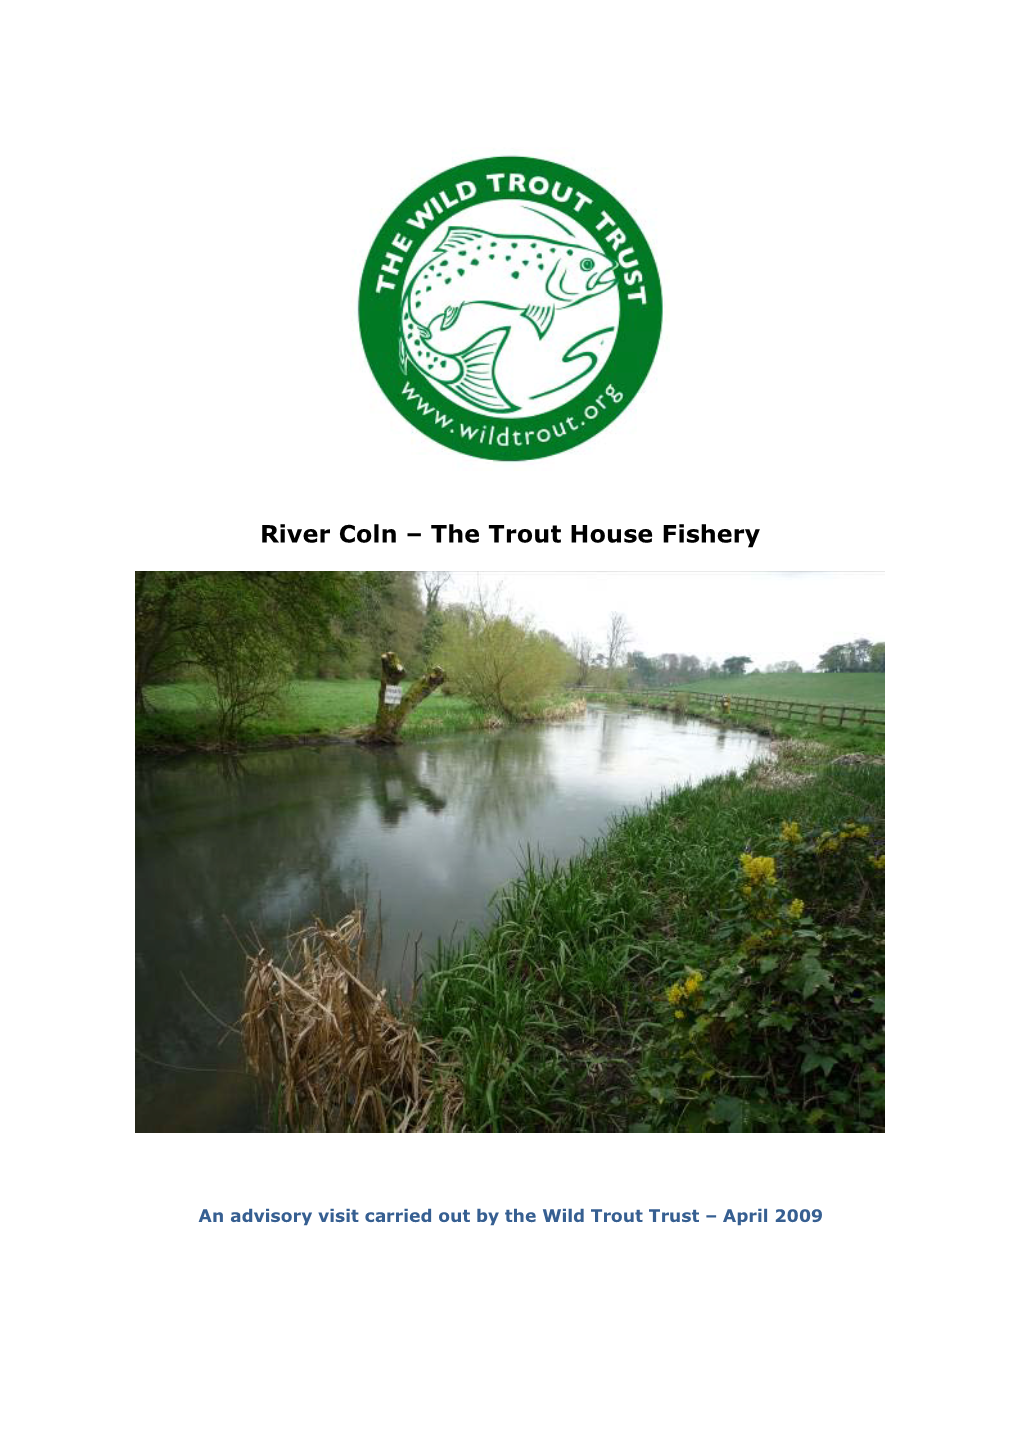 River Coln – the Trout House Fishery